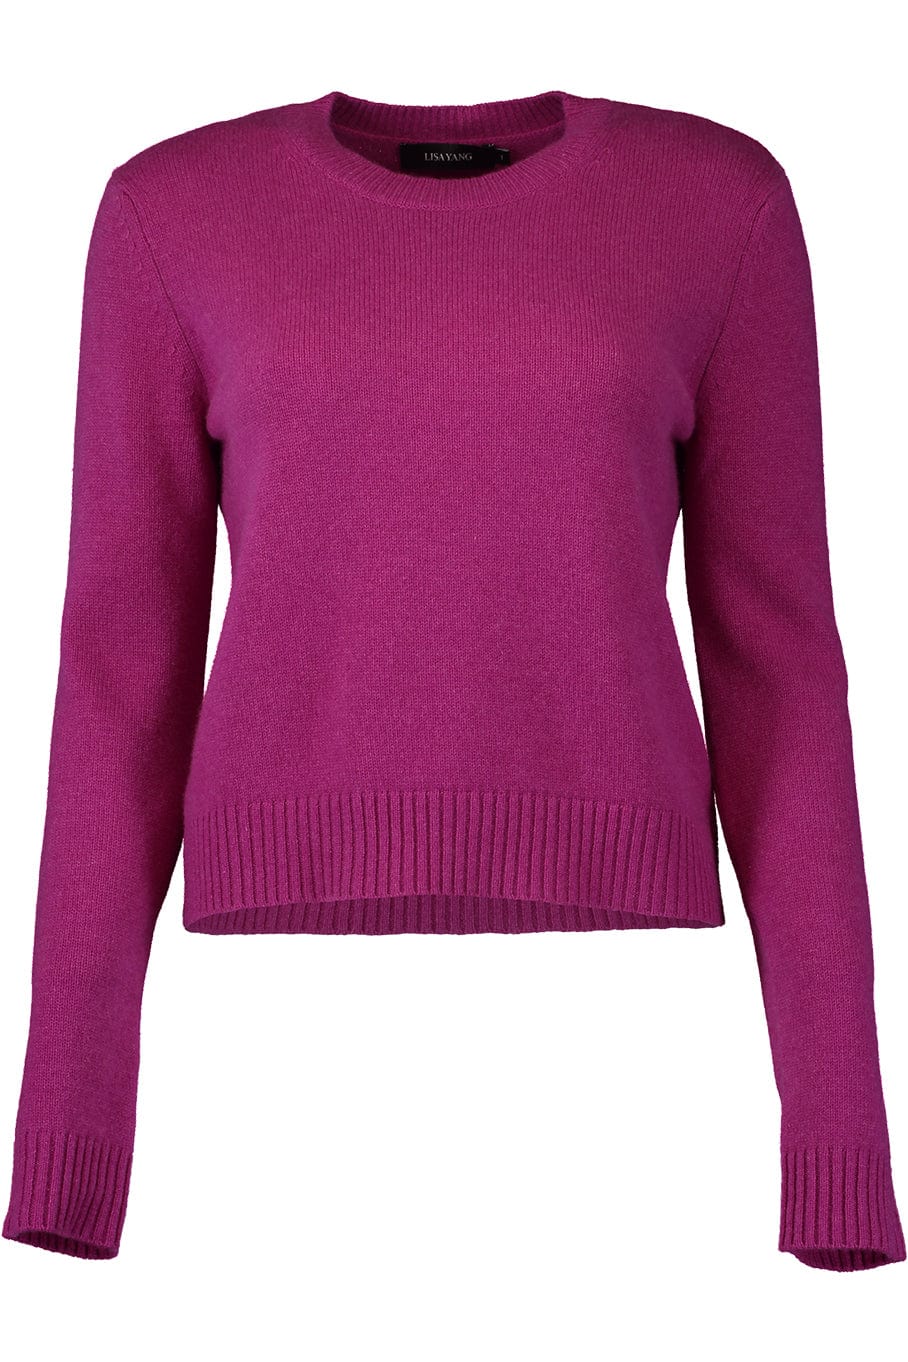 LISA YANG-Mable Sweater - Mulberry-